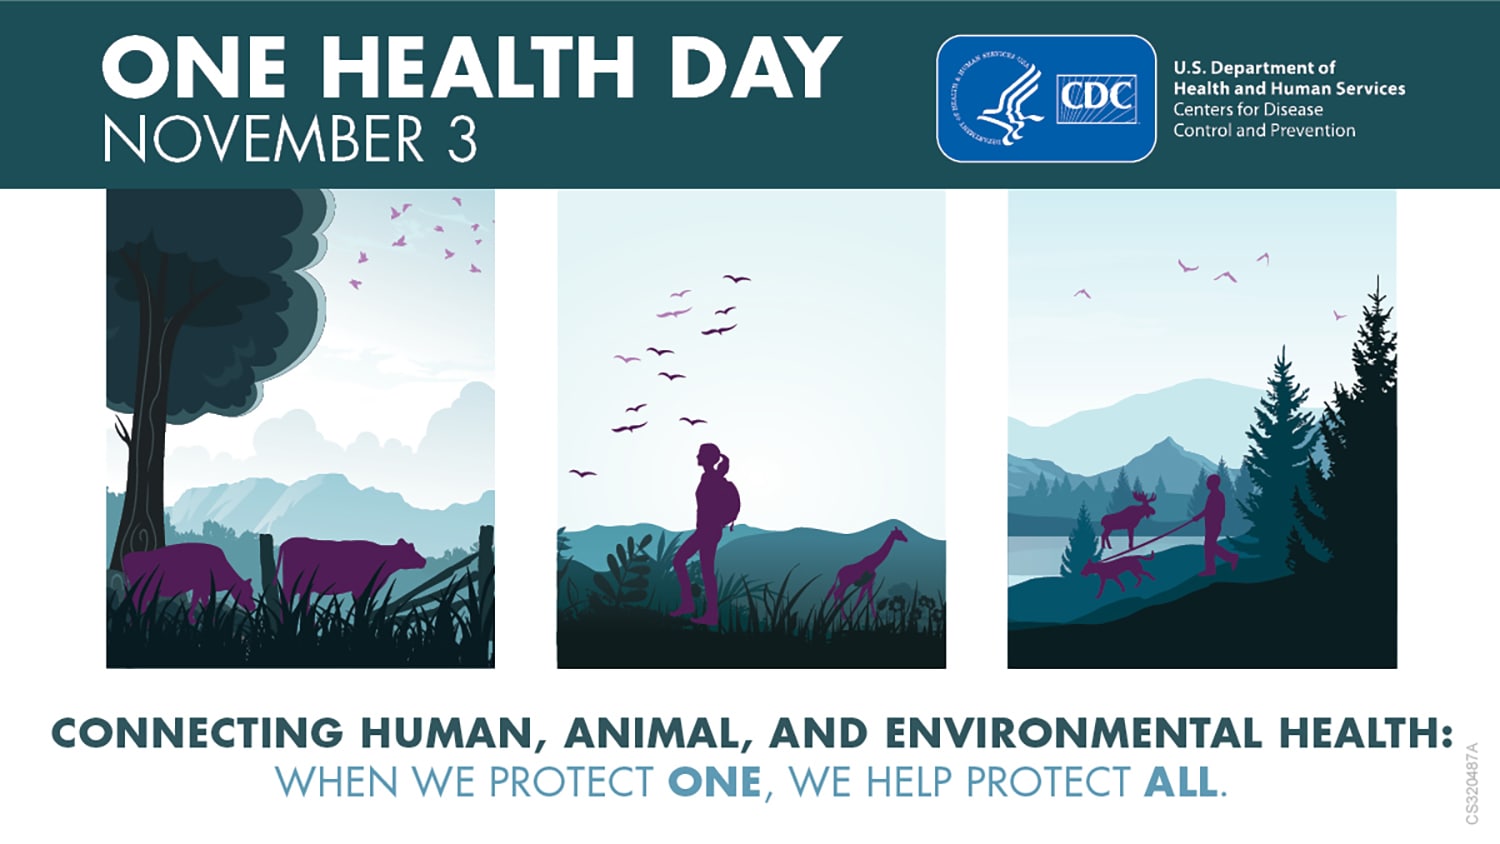 Three panels illustrate people and animals interacting in the surrounding environment. Text says: One Health Day November 3. Connecting human, animal, and environmental Health. When we protect one, we help protect all.